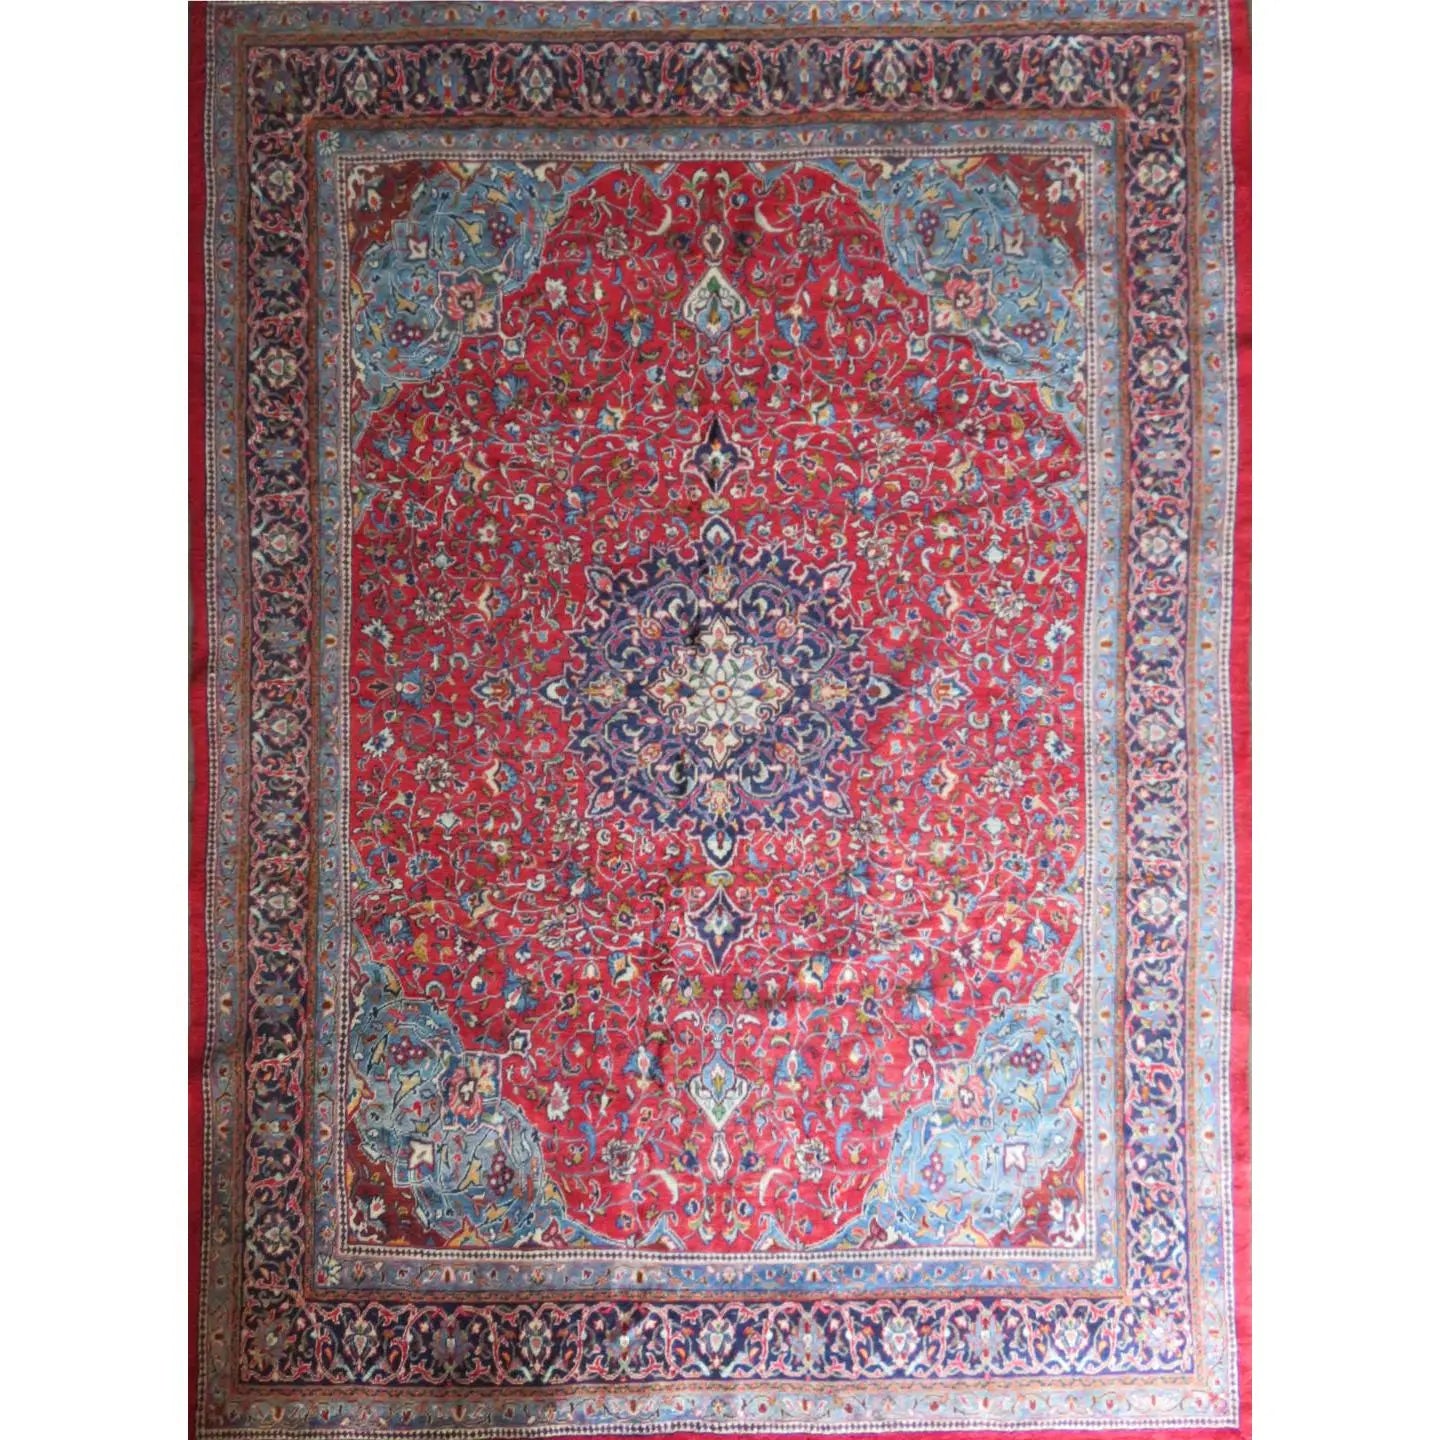 Hand-Knotted Persian Wool Rug _ Luxurious Vintage Design, 13'7" x 9'7", Artisan Crafted